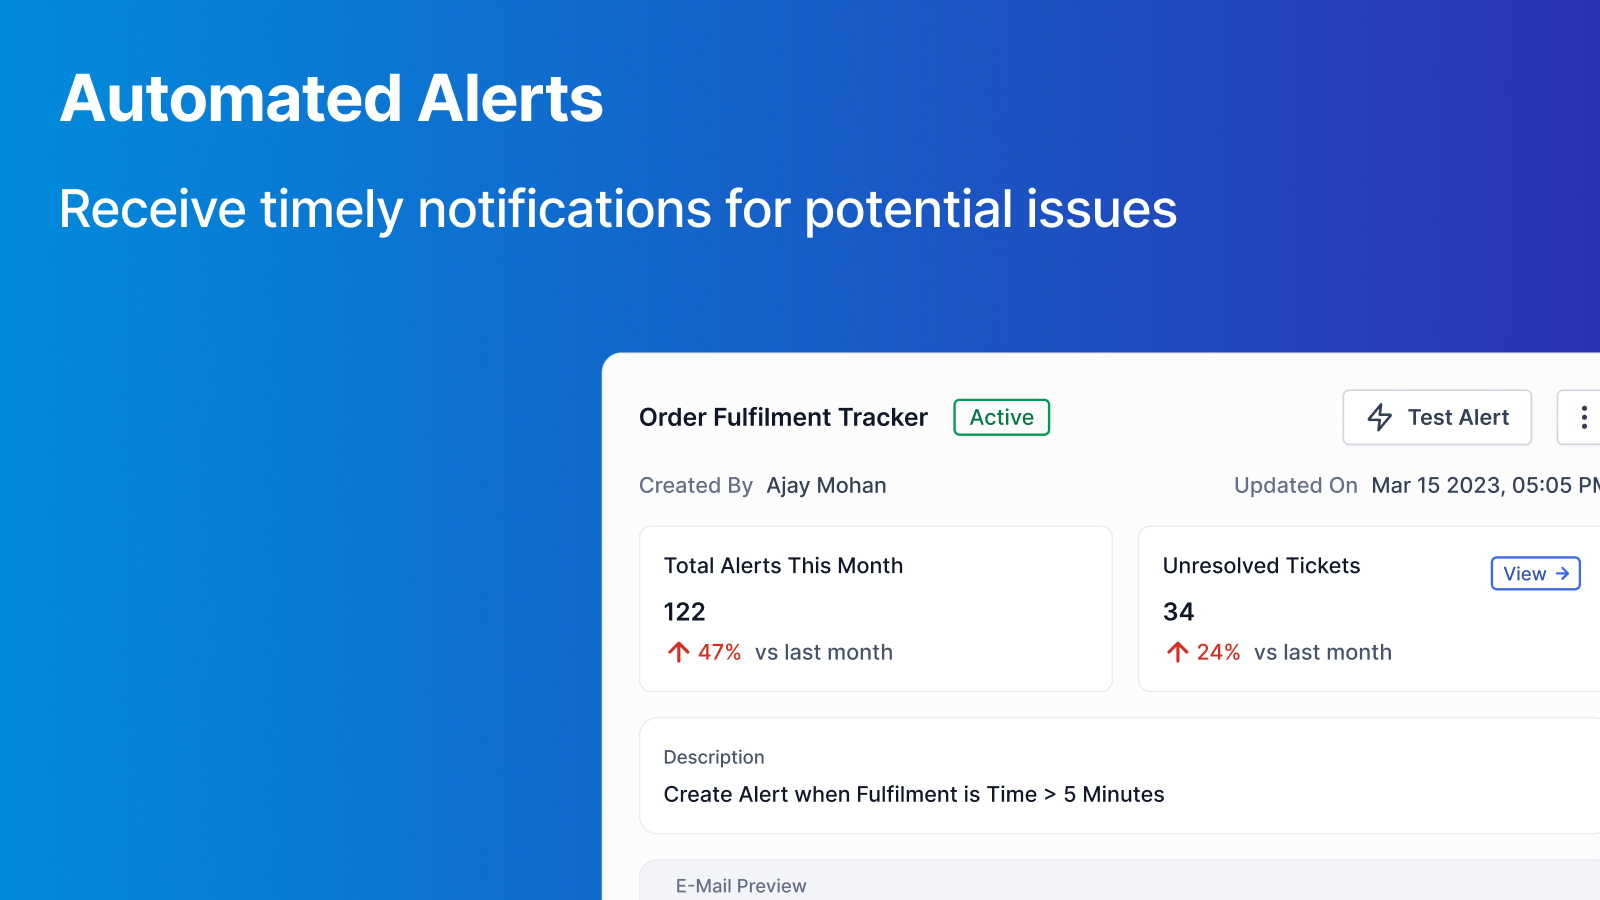 Automated Alerts: Receive timely alerts for potential issues